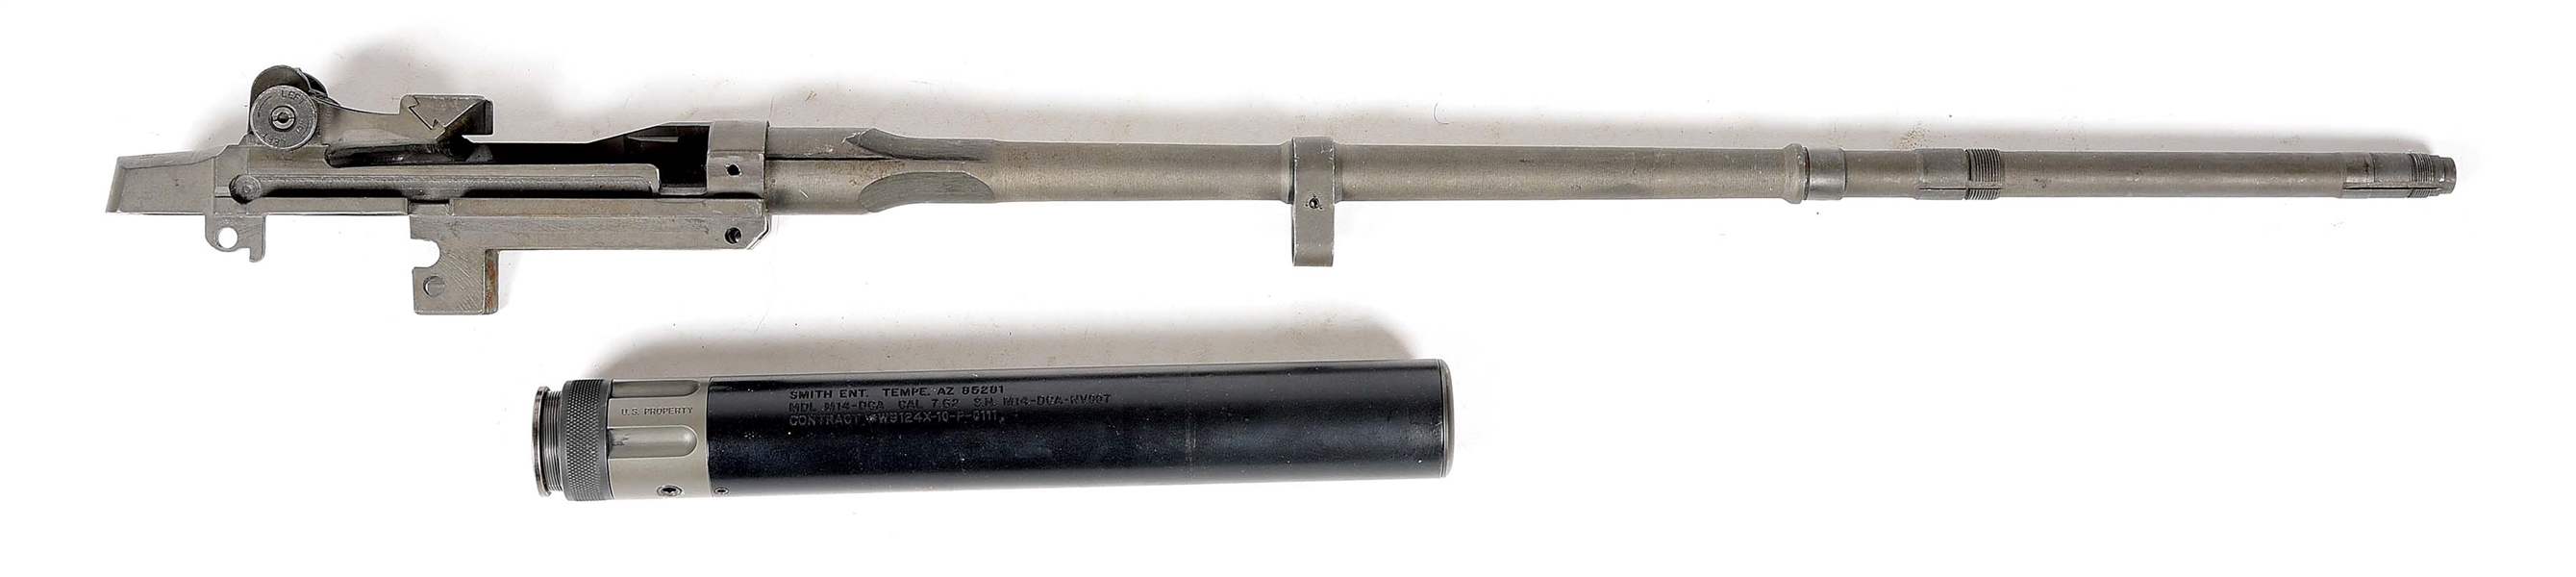 (N) FORM 2 REGISTERED M14 MACHINE GUN BARRELED RECEIVER WITH U.S. PROPERTY MARKED SMITH ENTERPRISES M14DCA SILENCER (FULLY TRANSFERABLE).